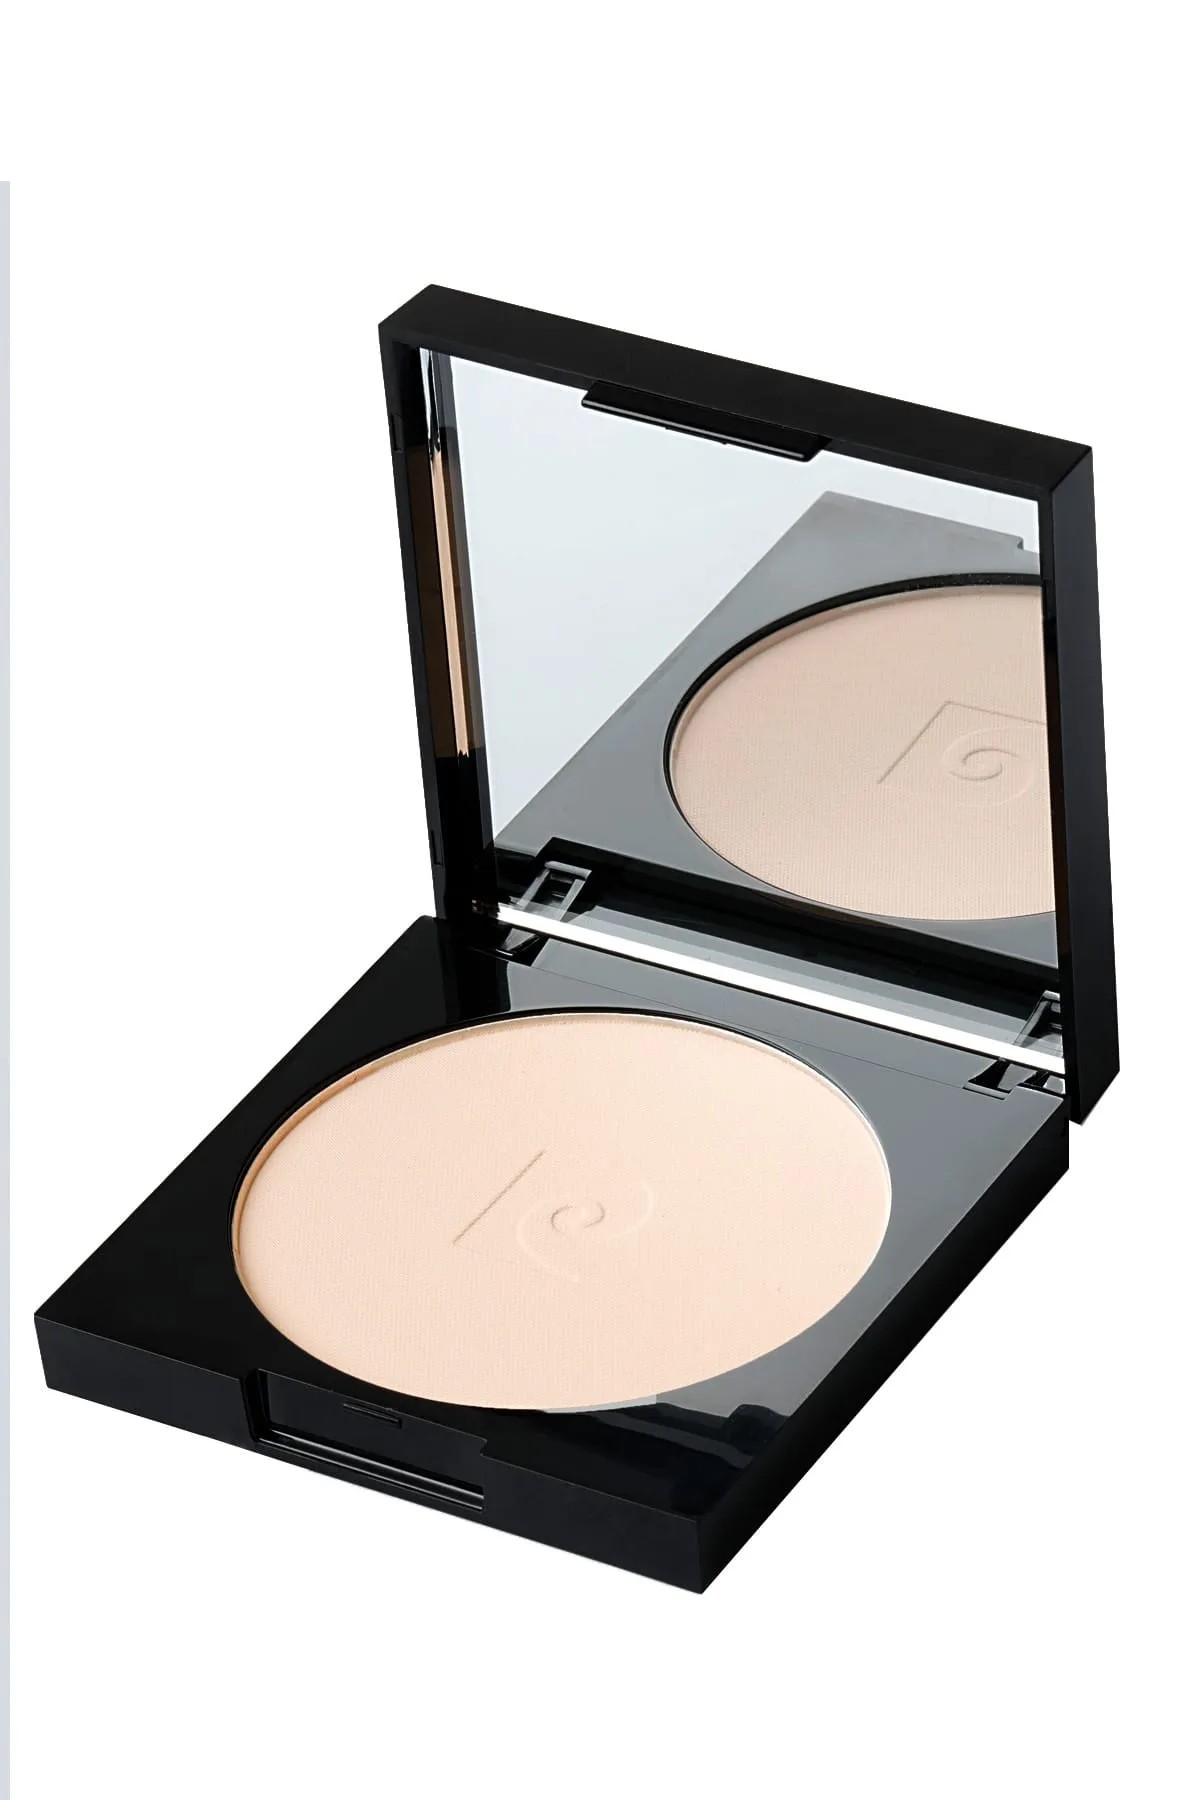 Pierre Cardin Pudra - Porcelain Edition Compact Powder Neutral Ivory